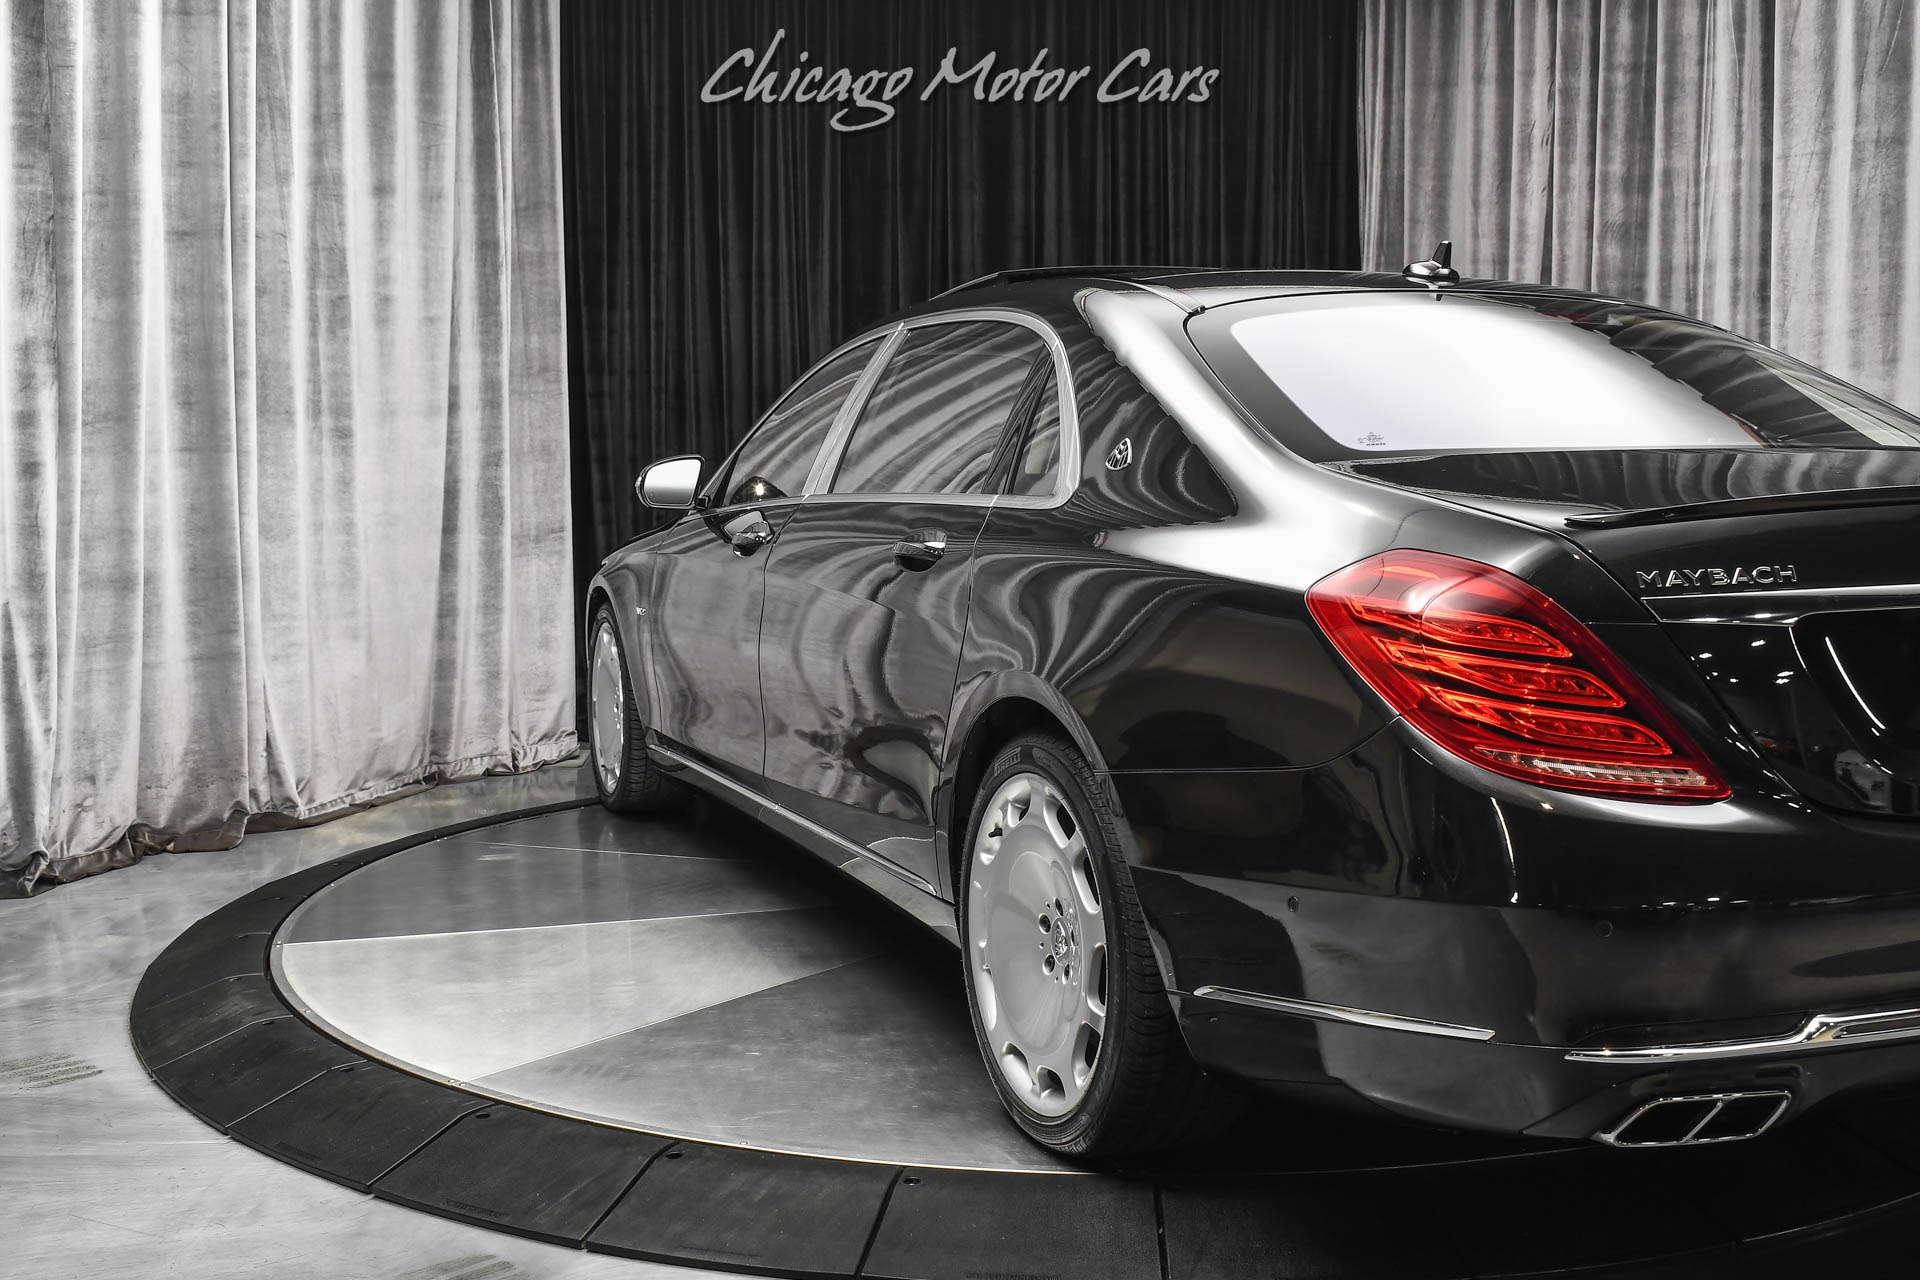 Used-2016-Mercedes-Benz-S600-Maybach-Sedan-Magic-Sky-Control-STUNNING-Color-Combo-HIGH-MSRP